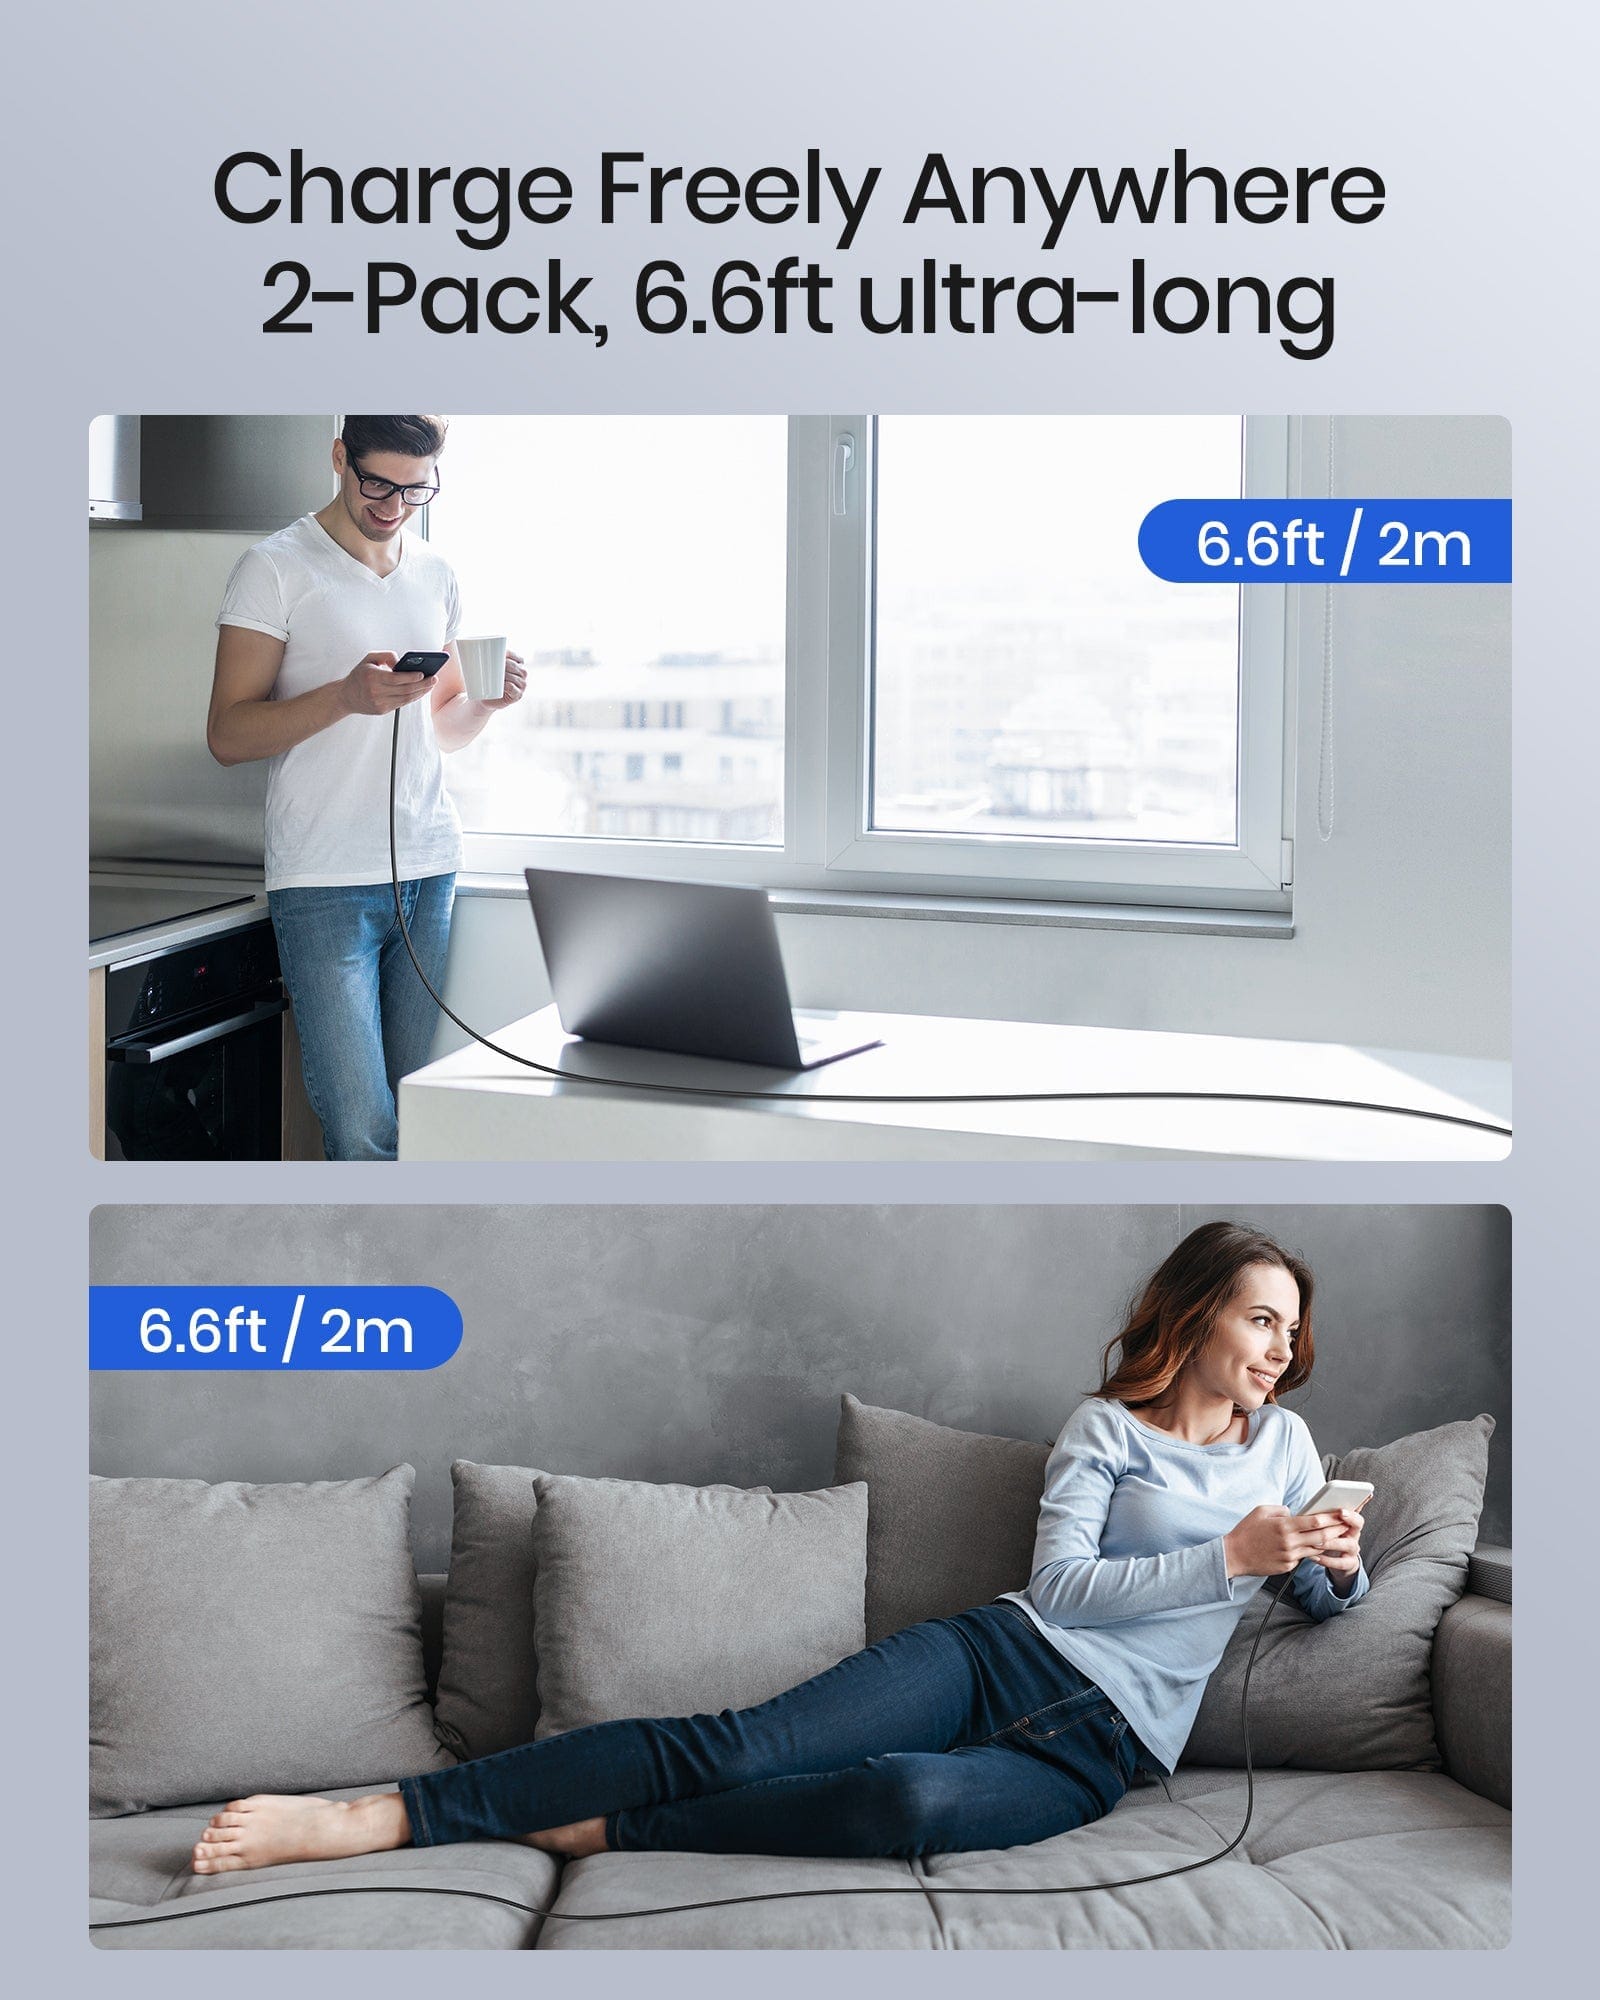 Charge Freely Anywhere 2-Pack, 6.6ft ultra-long